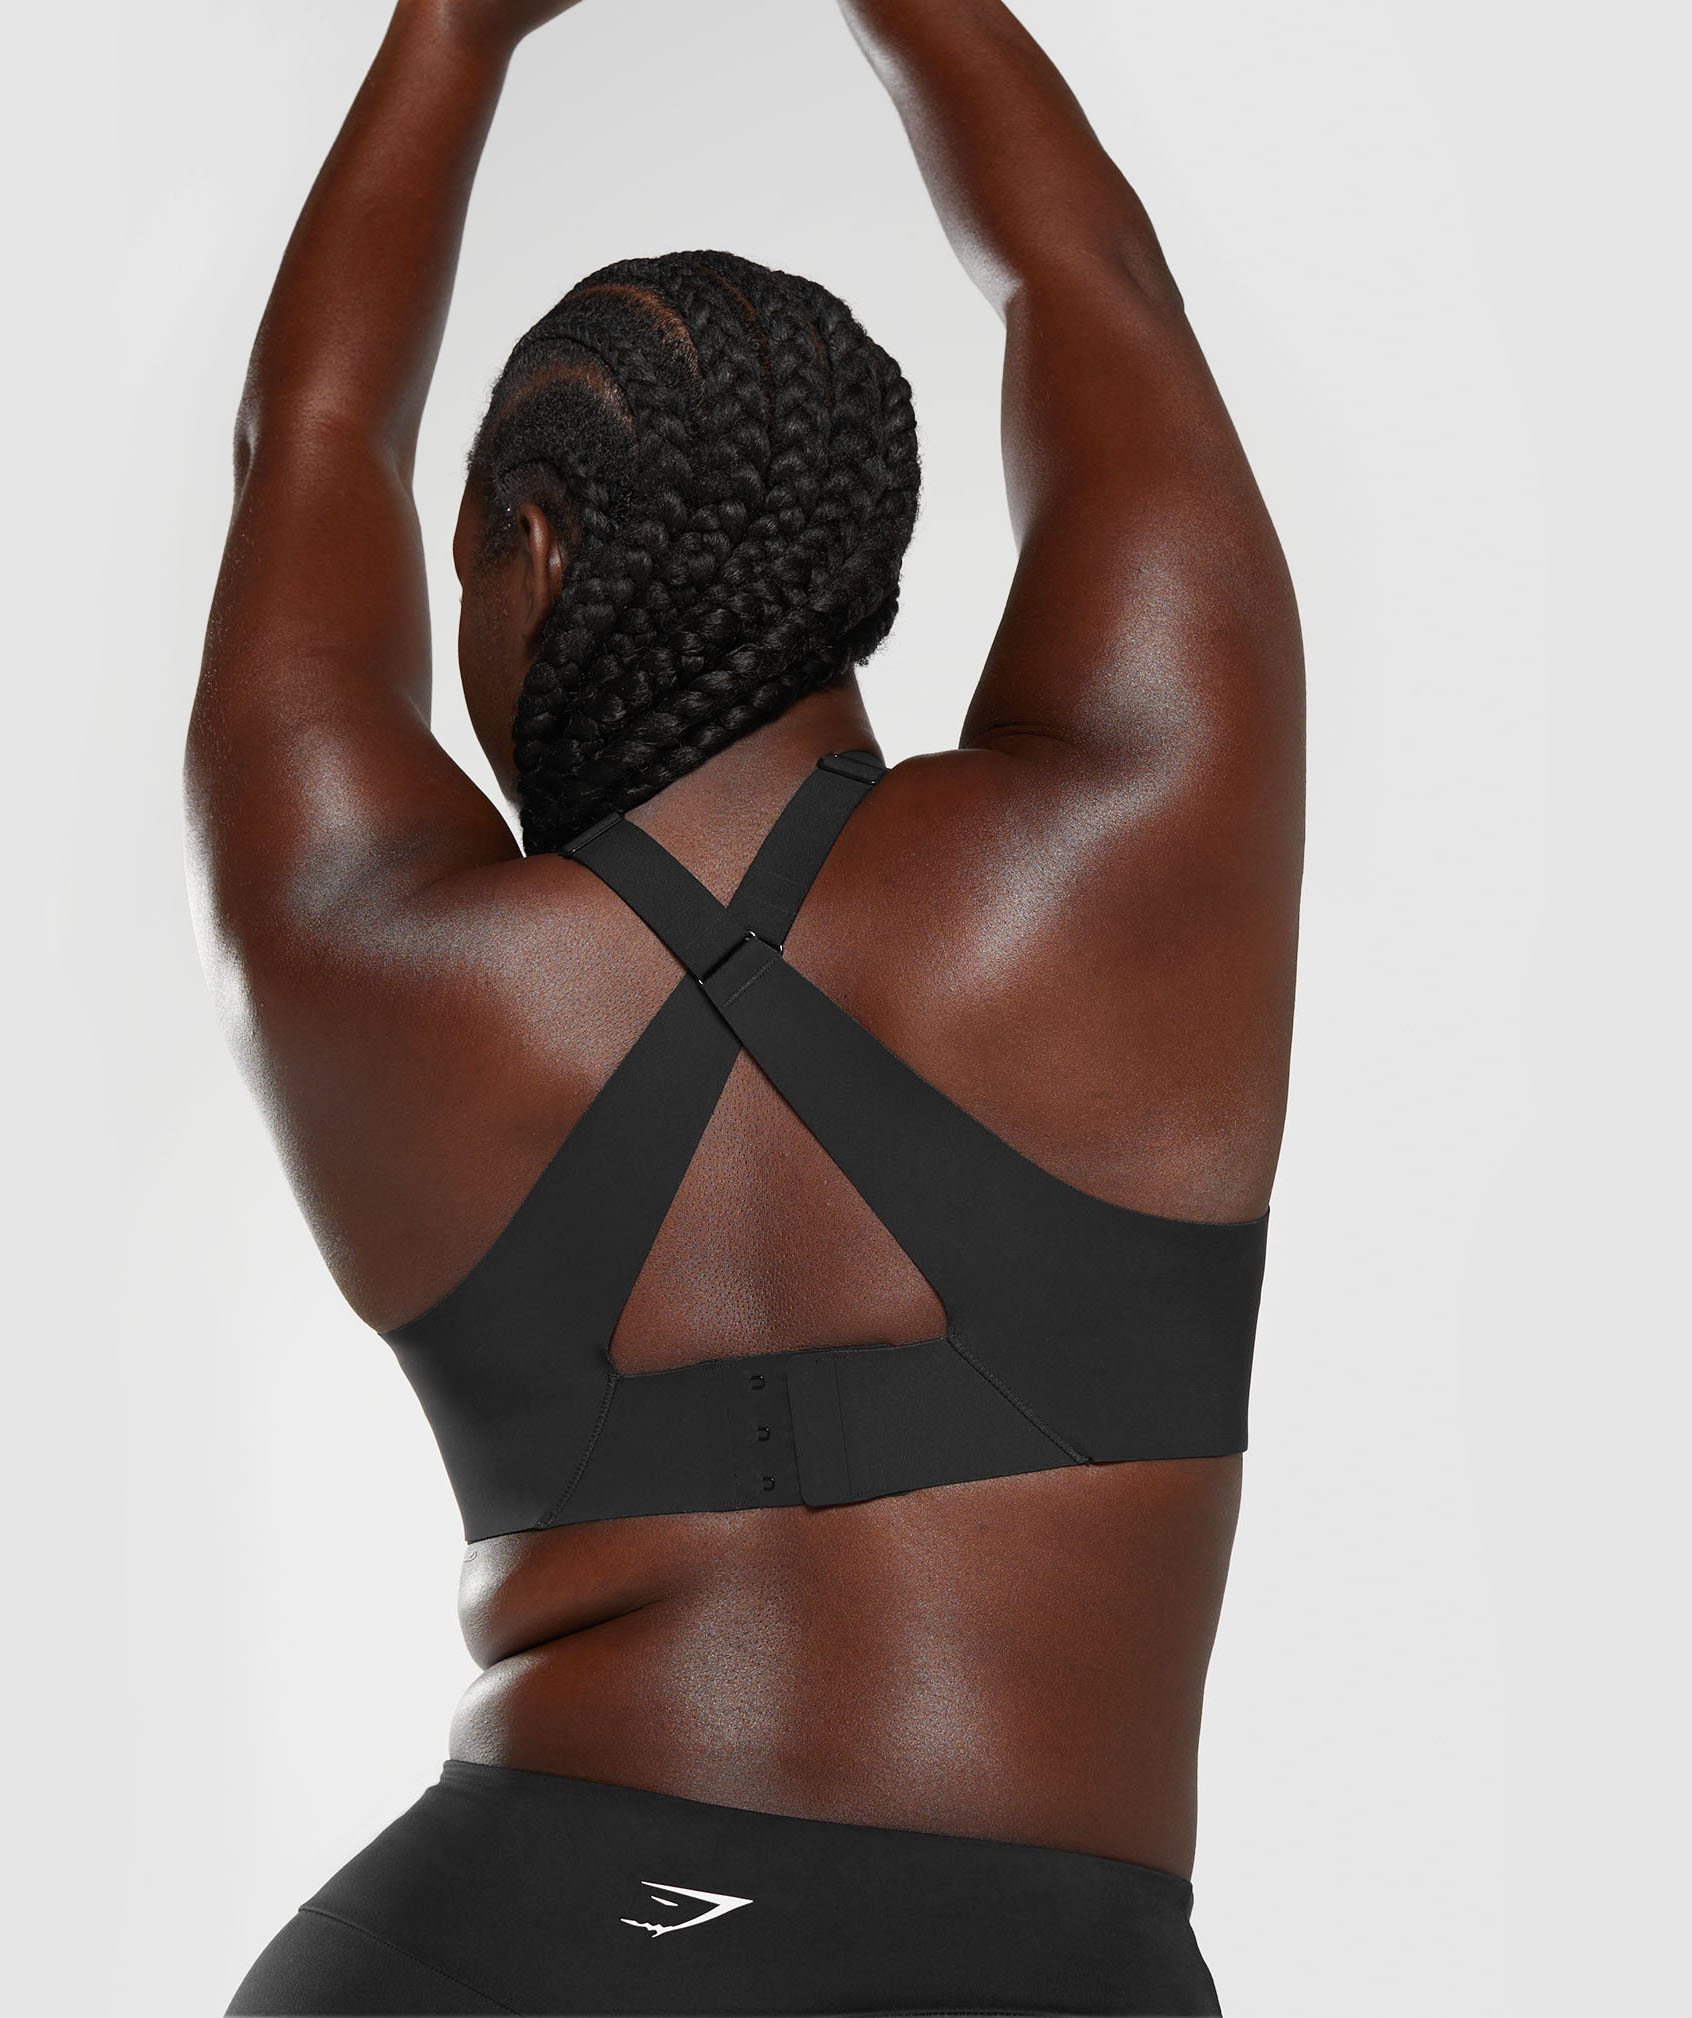 The most flattering Sports Bra you could possibly own. With a low